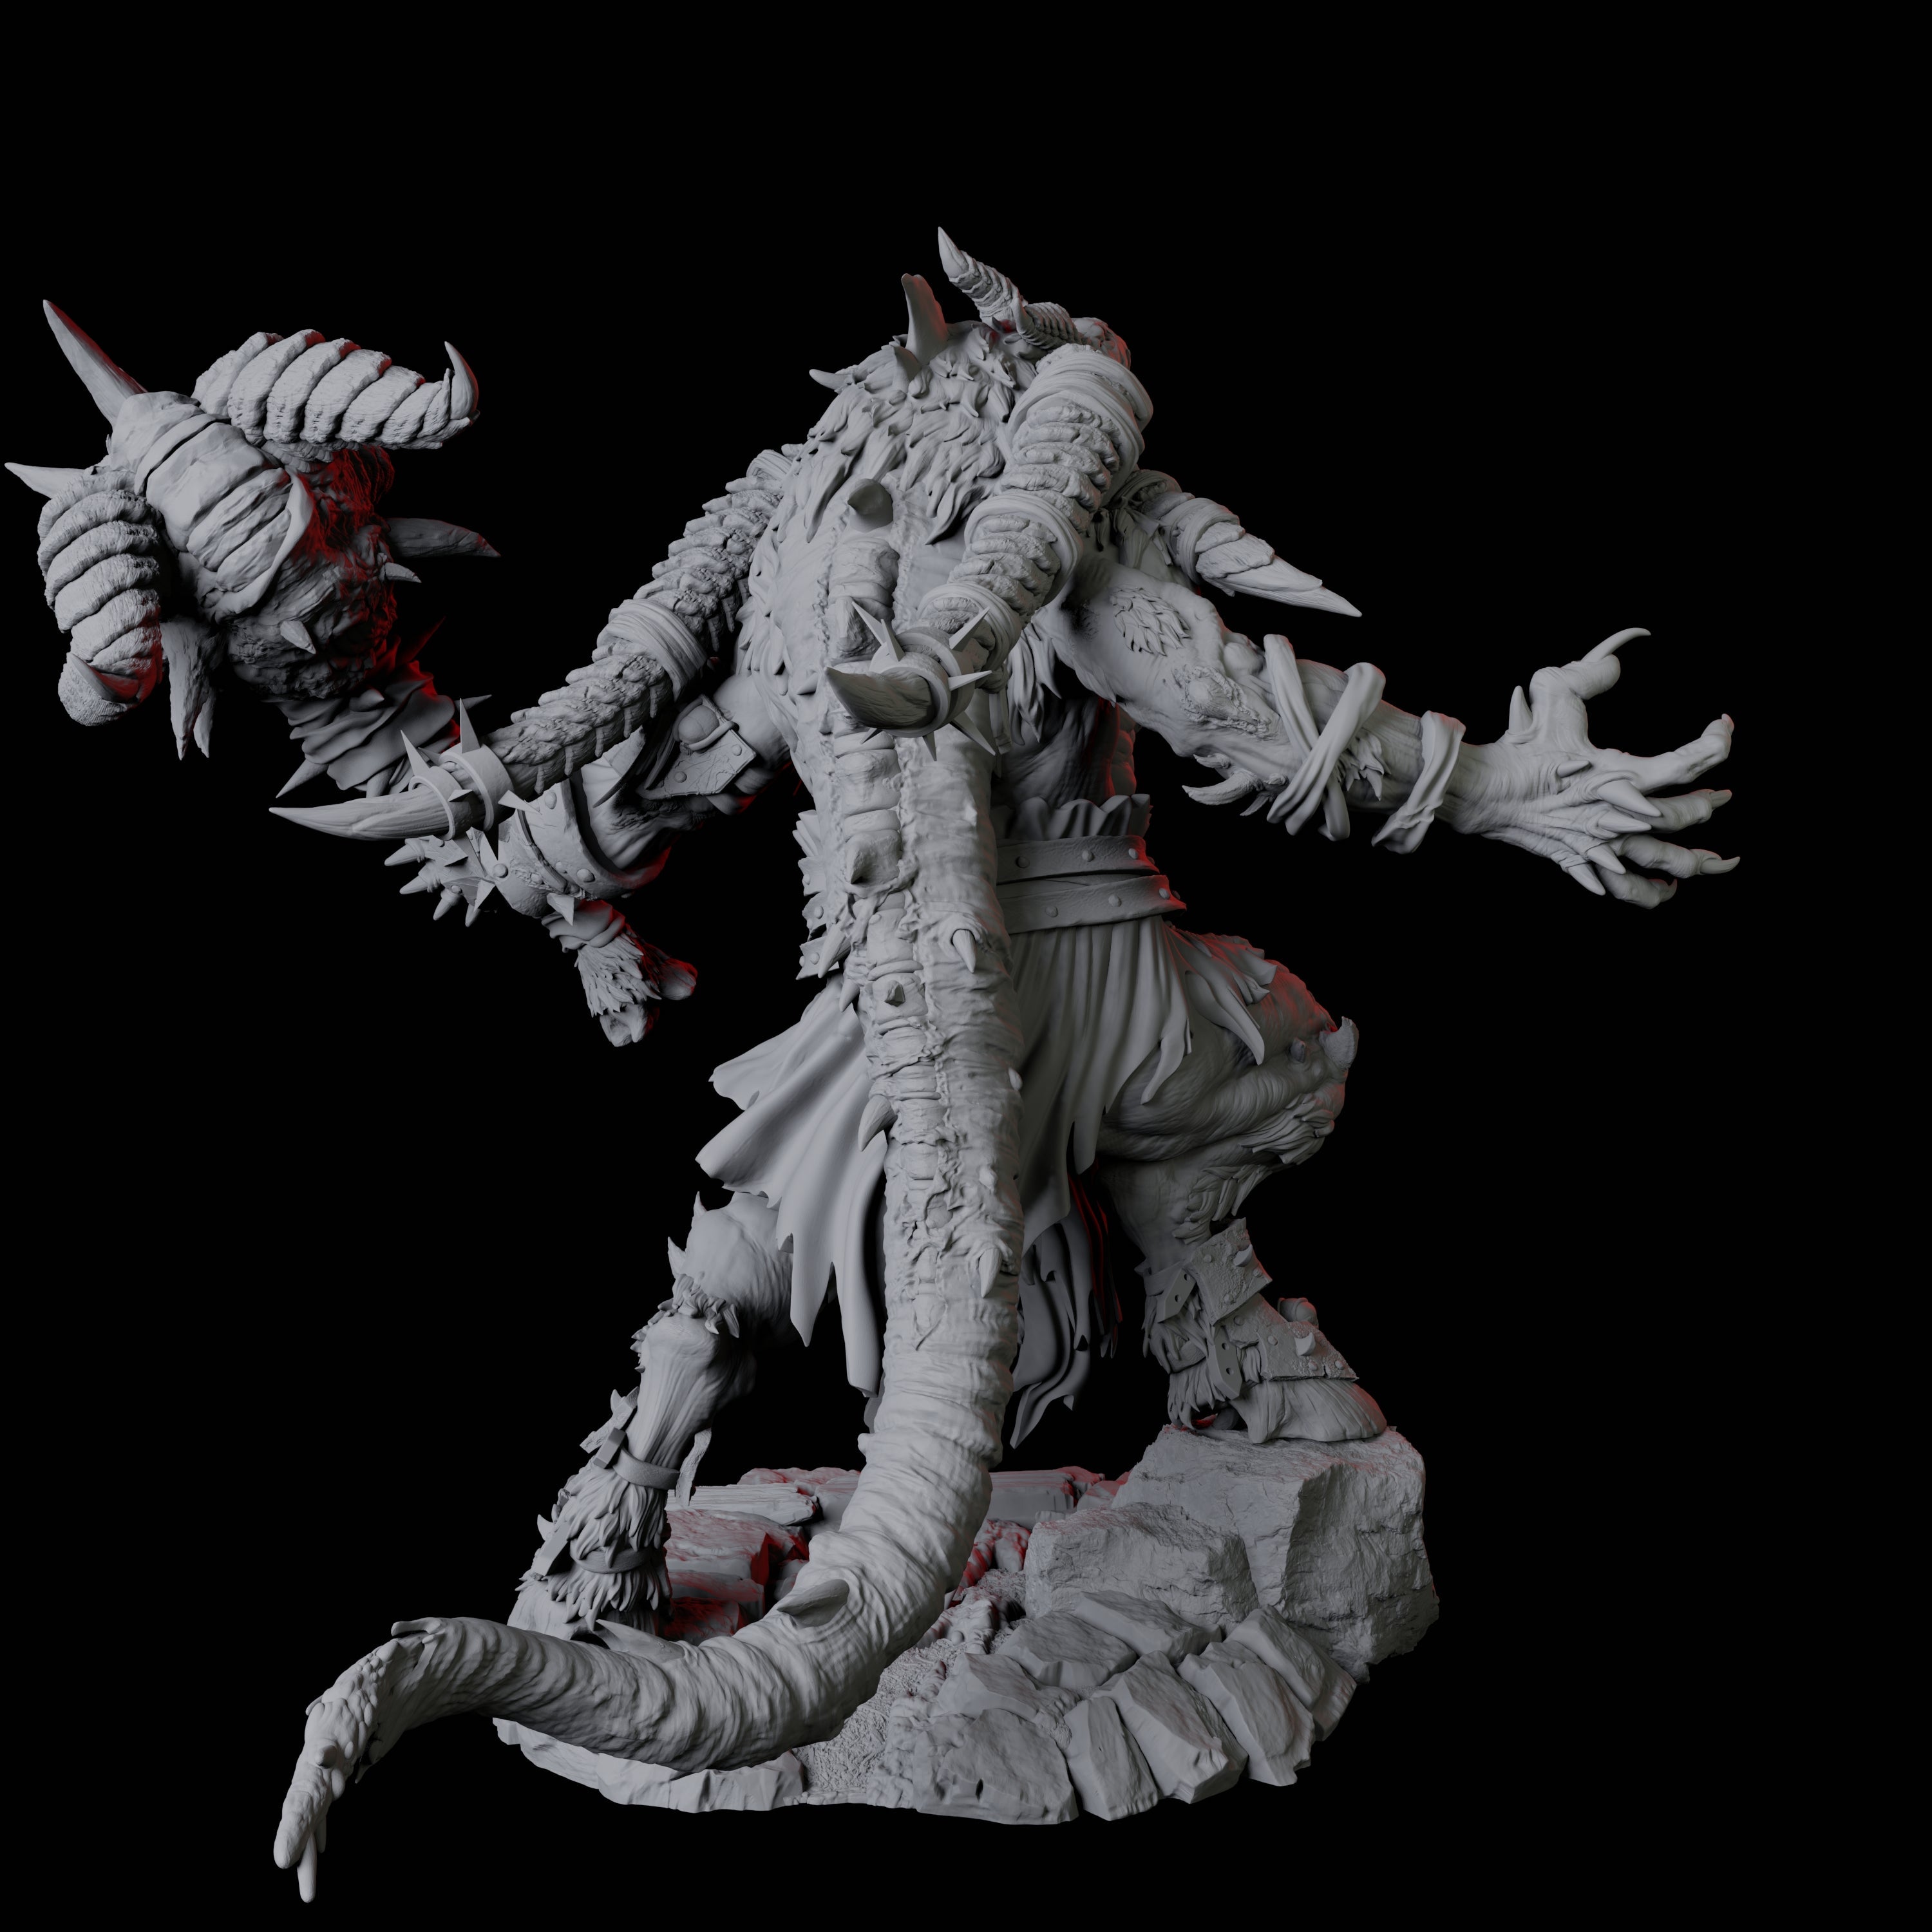 Giant Ratfolk Barbarian B Miniature for Dungeons and Dragons, Pathfinder or other TTRPGs